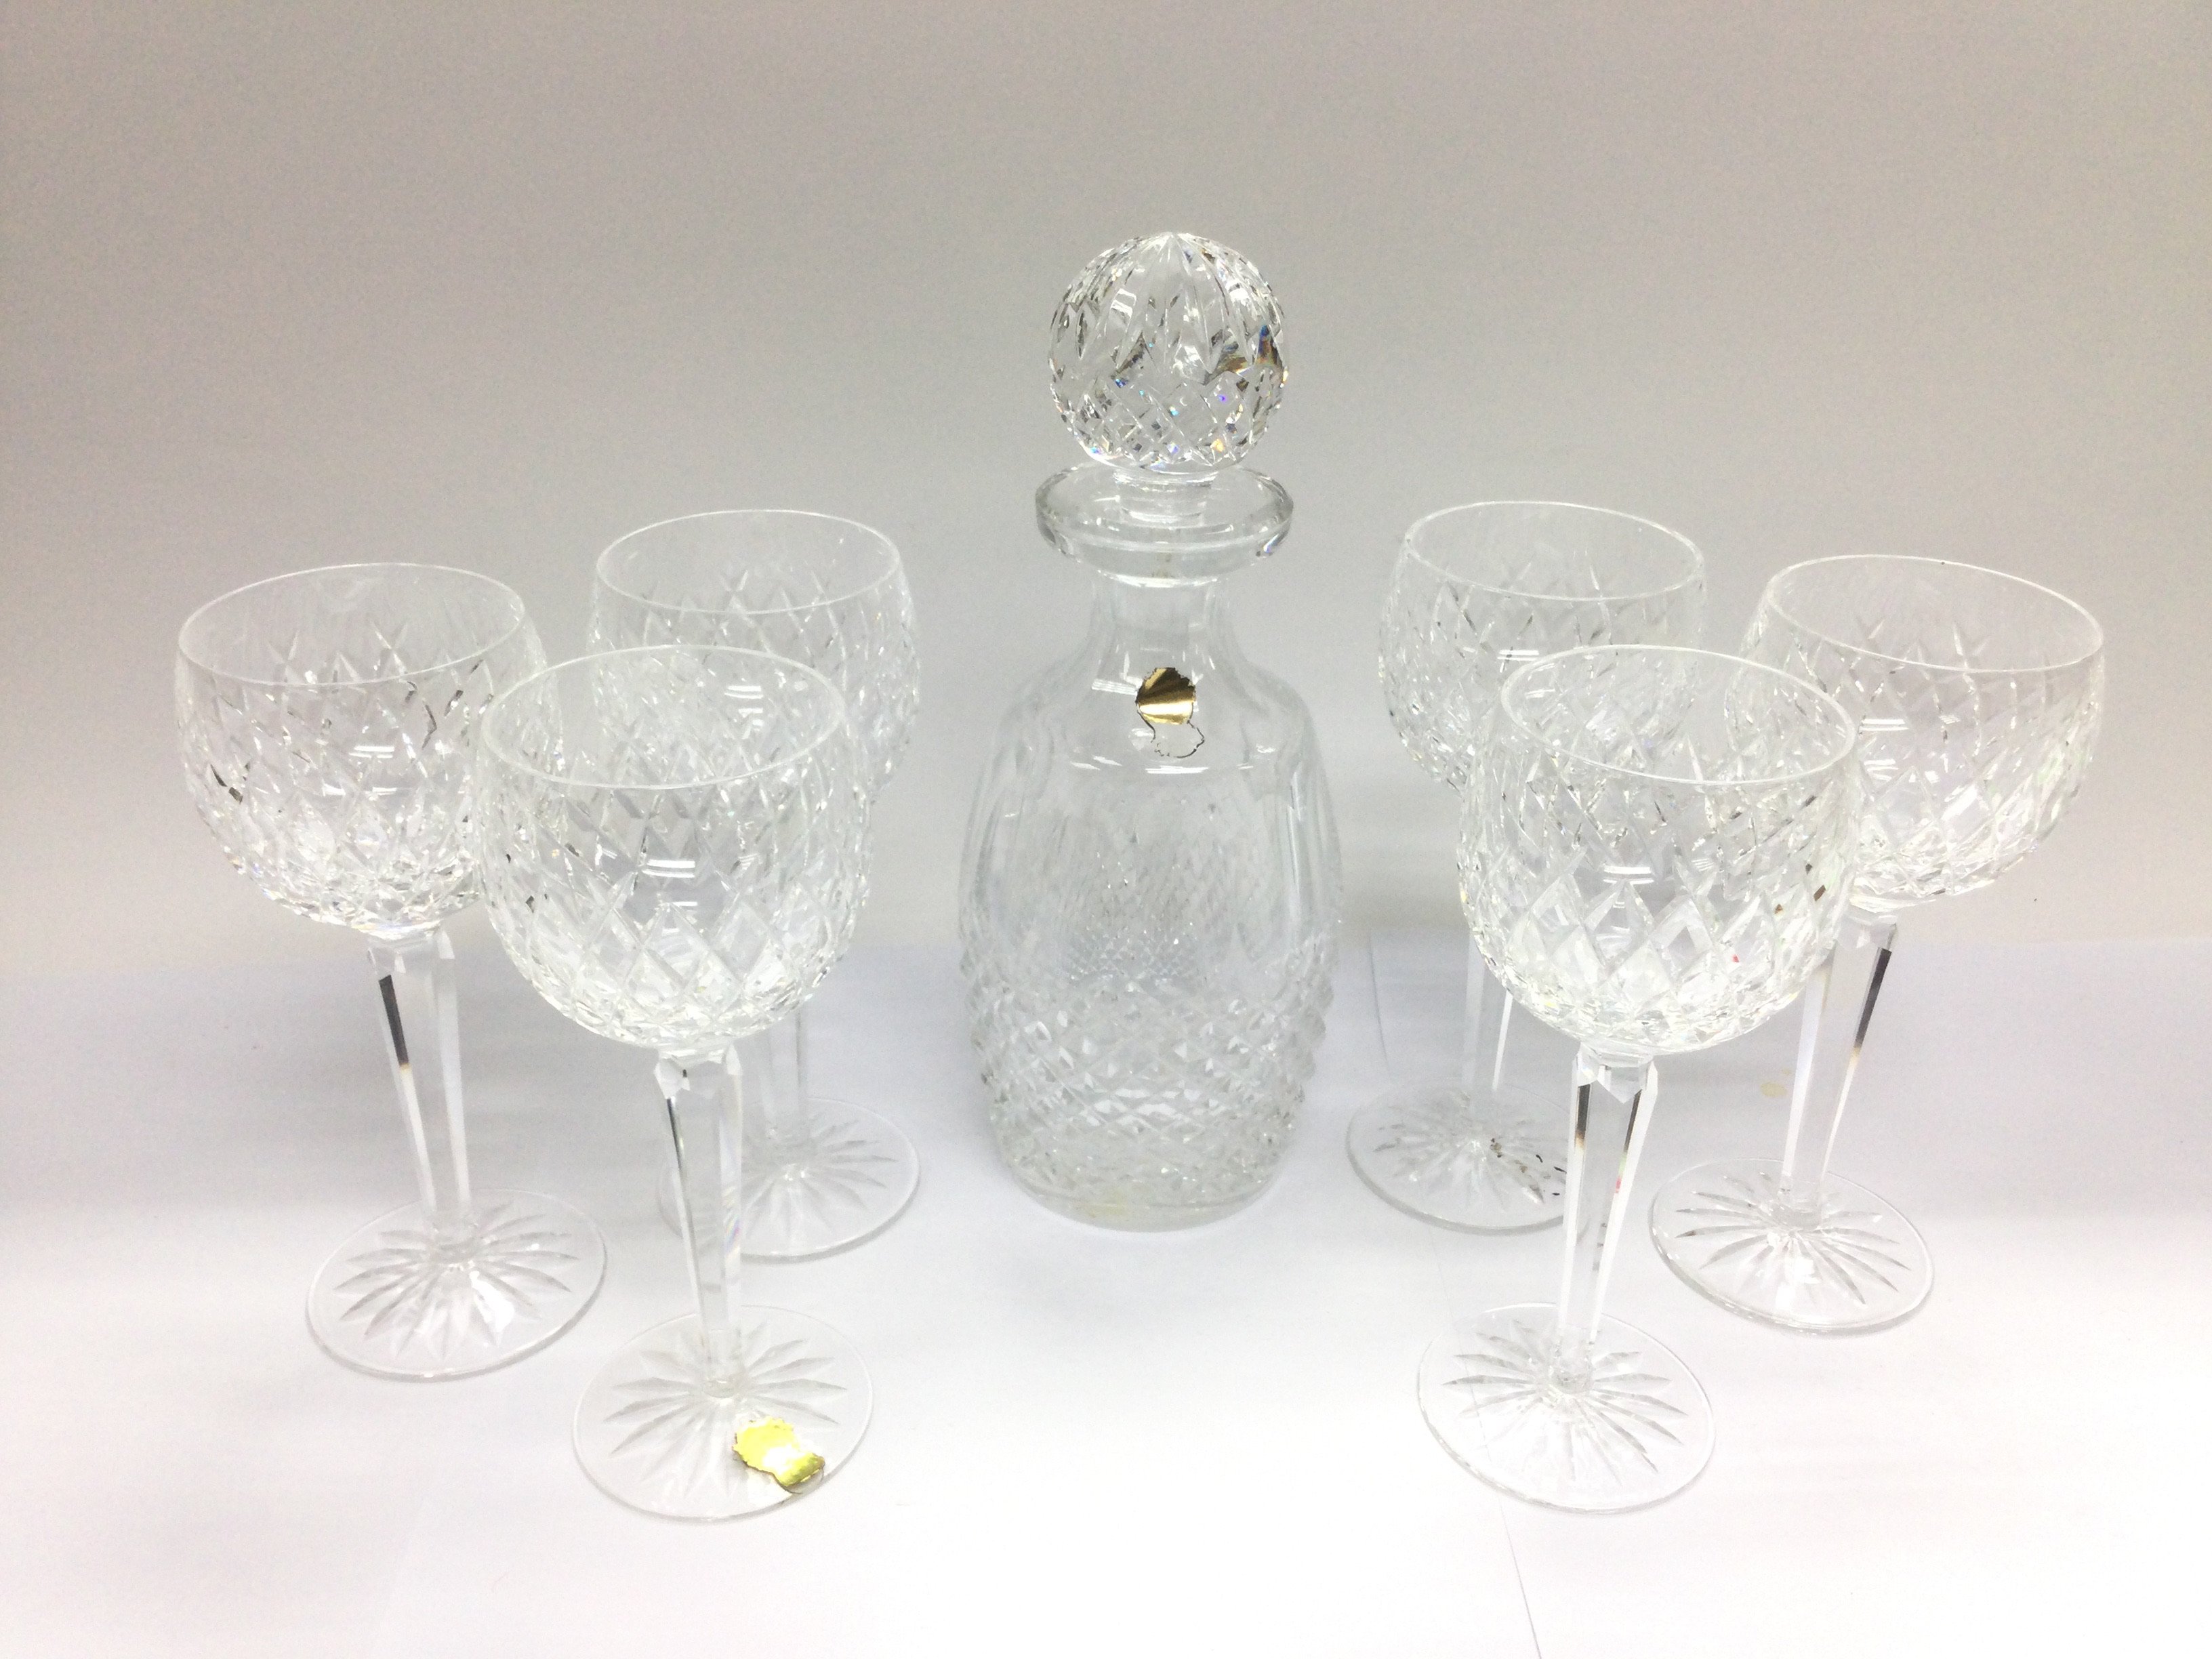 A Waterford crystal decanter and six glasses. Ship